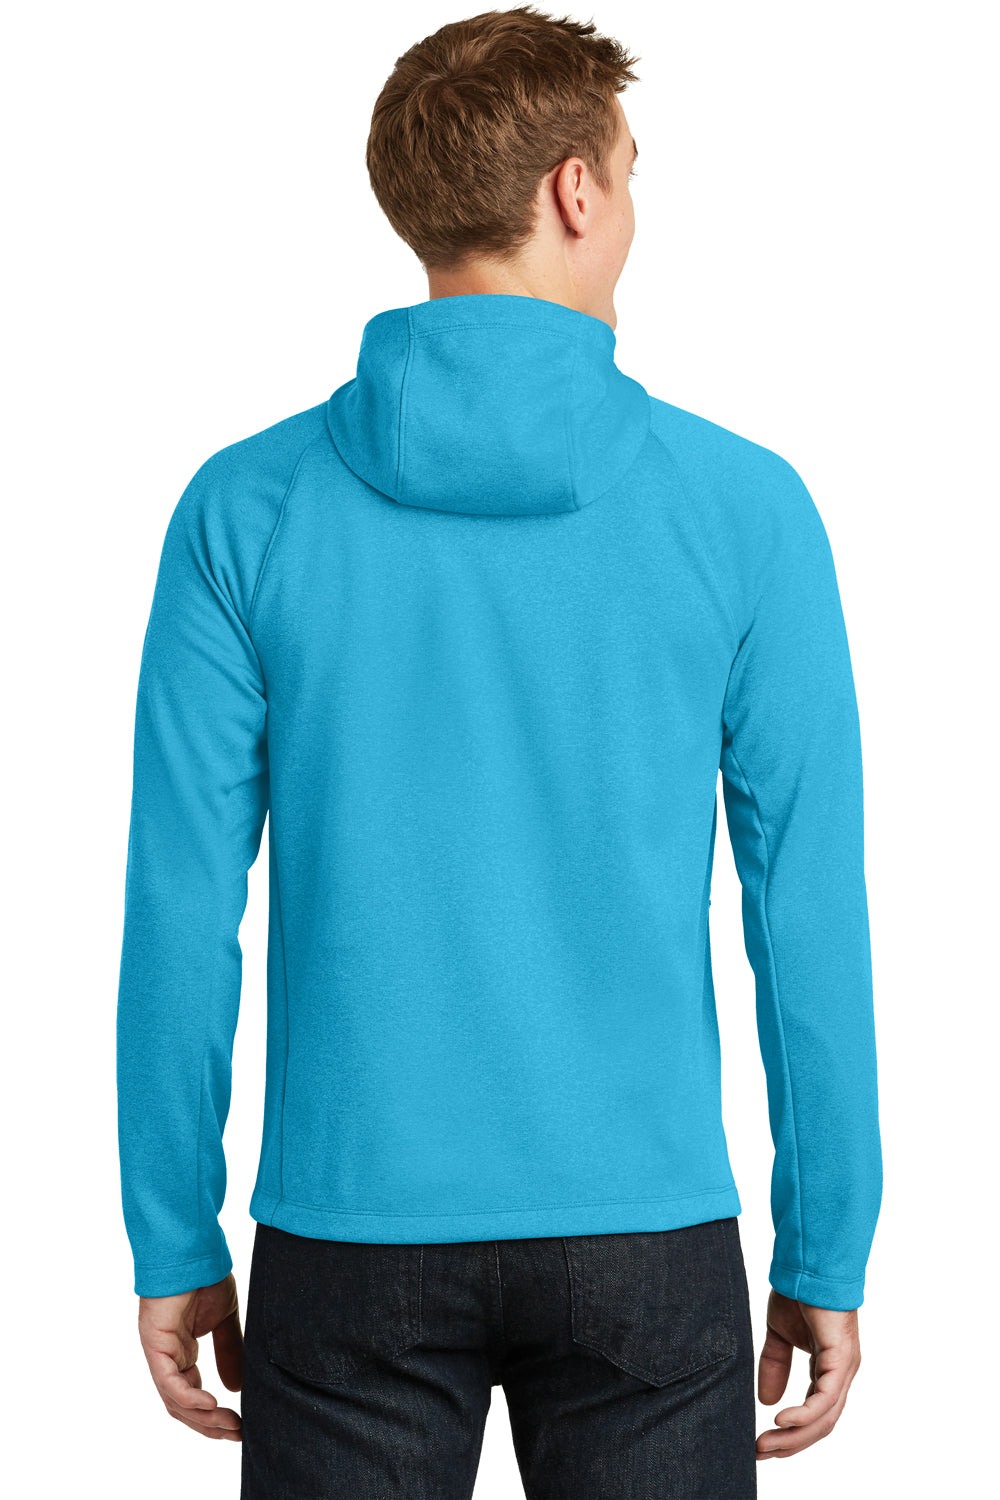 The North Face NF0A3LHH Mens Canyon Flats Full Zip Fleece Hooded Jacket Heather Hyper Blue Back